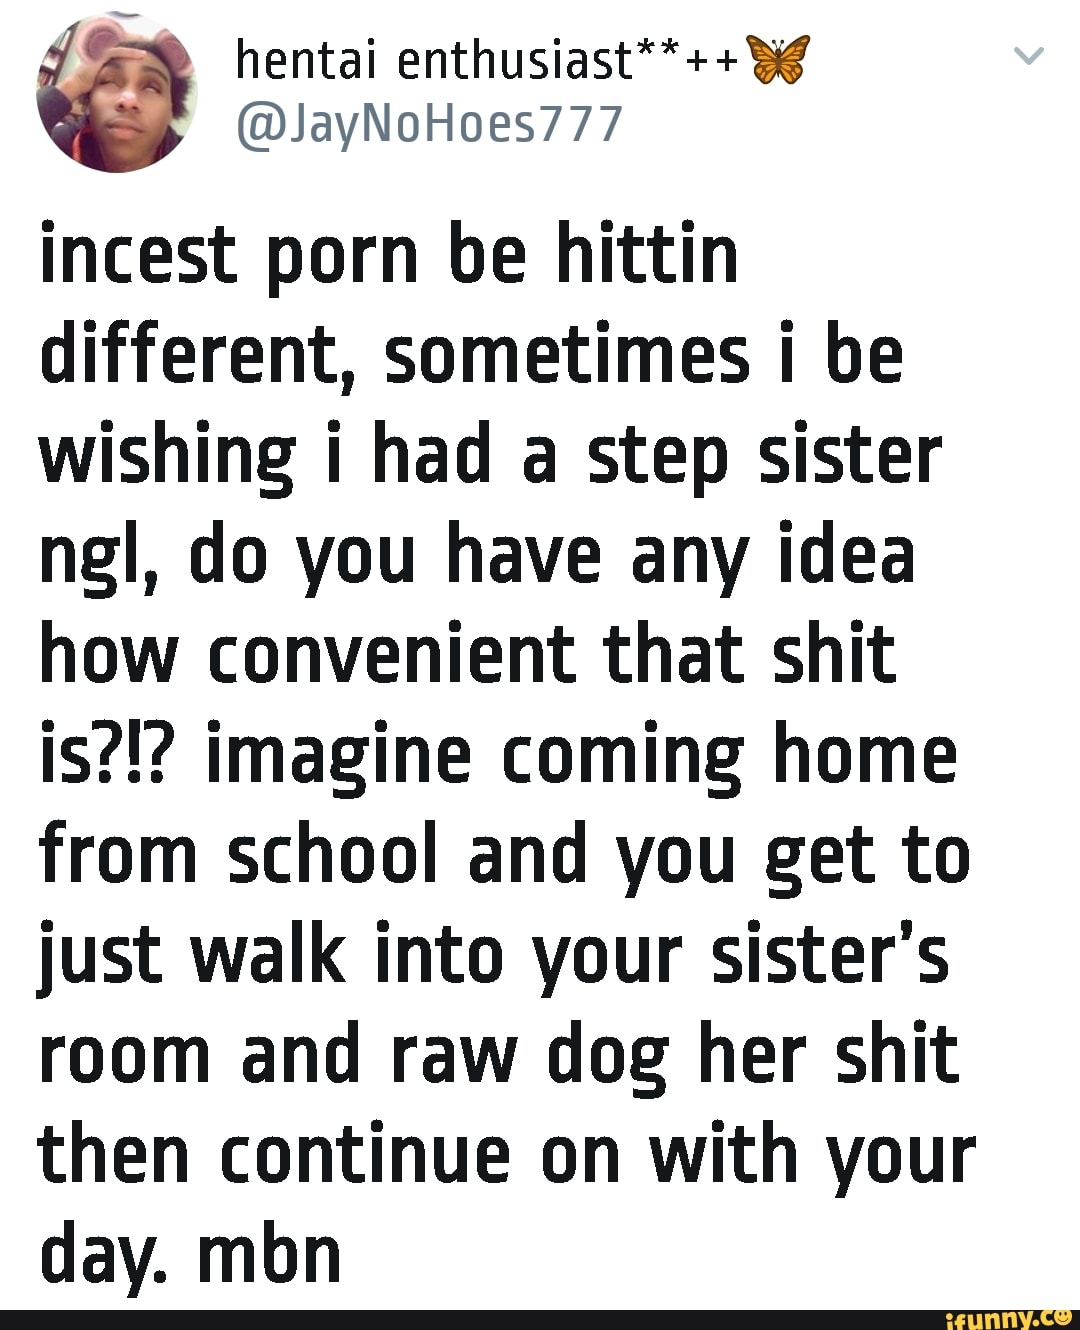 Incest porn be hittin different, sometimes i be wishing i had a step sister  ngl, do